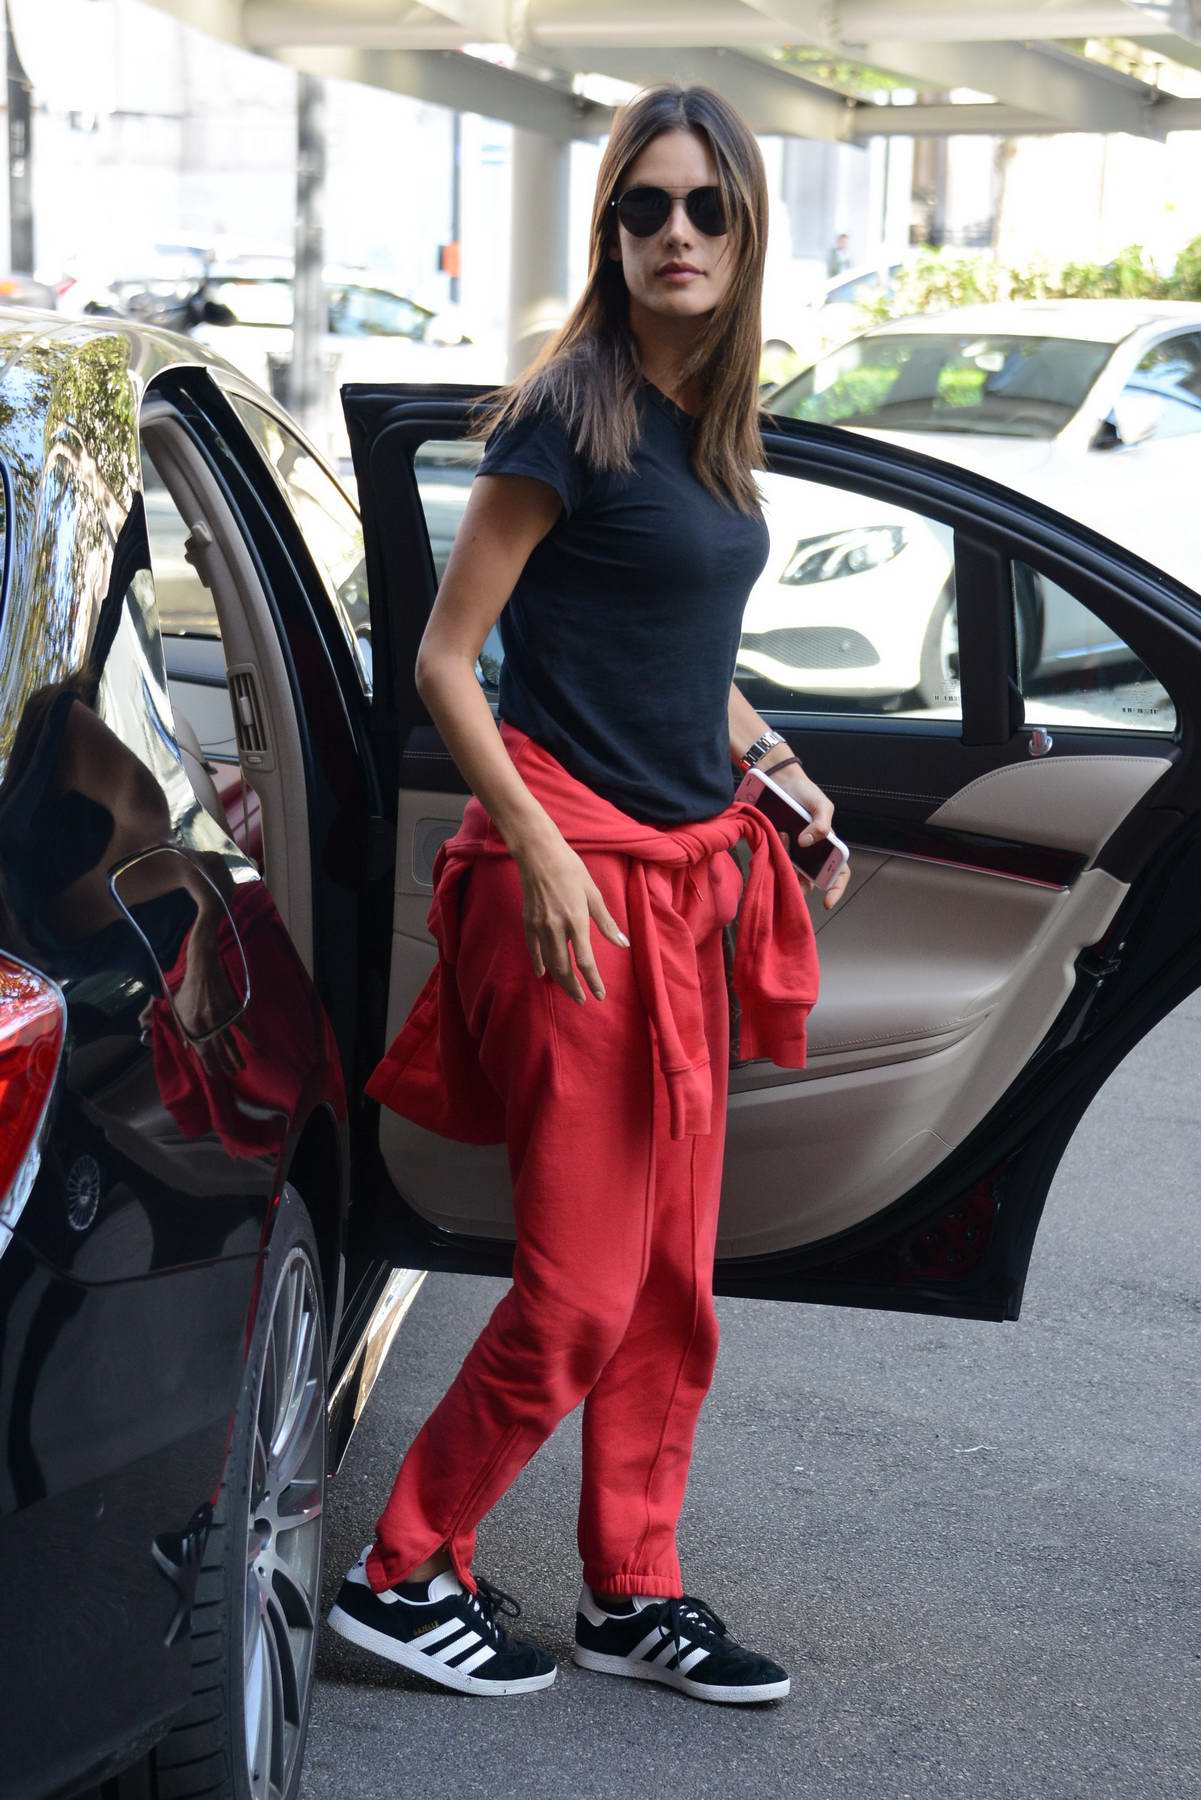 Alessandra Ambrosio In A Black Tee And Red Pants Arrives For Milan